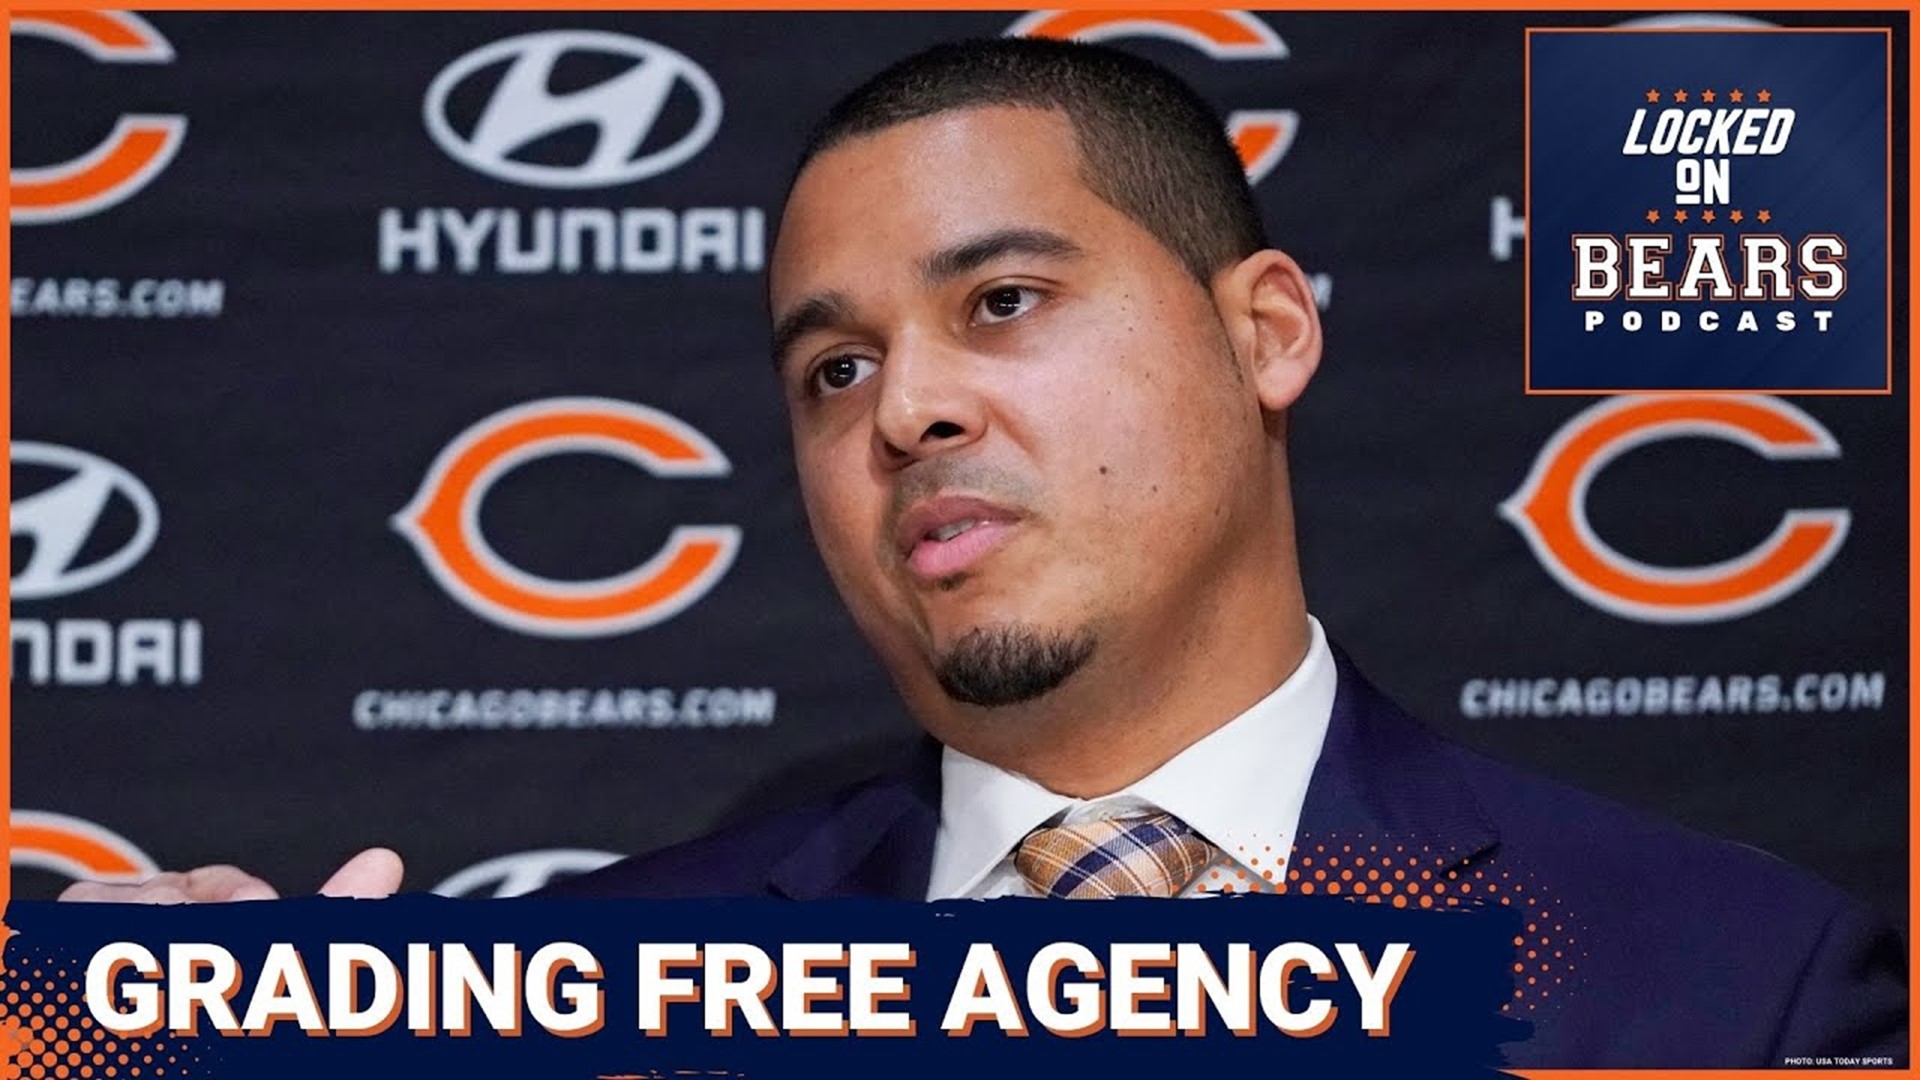 Chicago Bears free agency grades "A" for offensive weapons, but